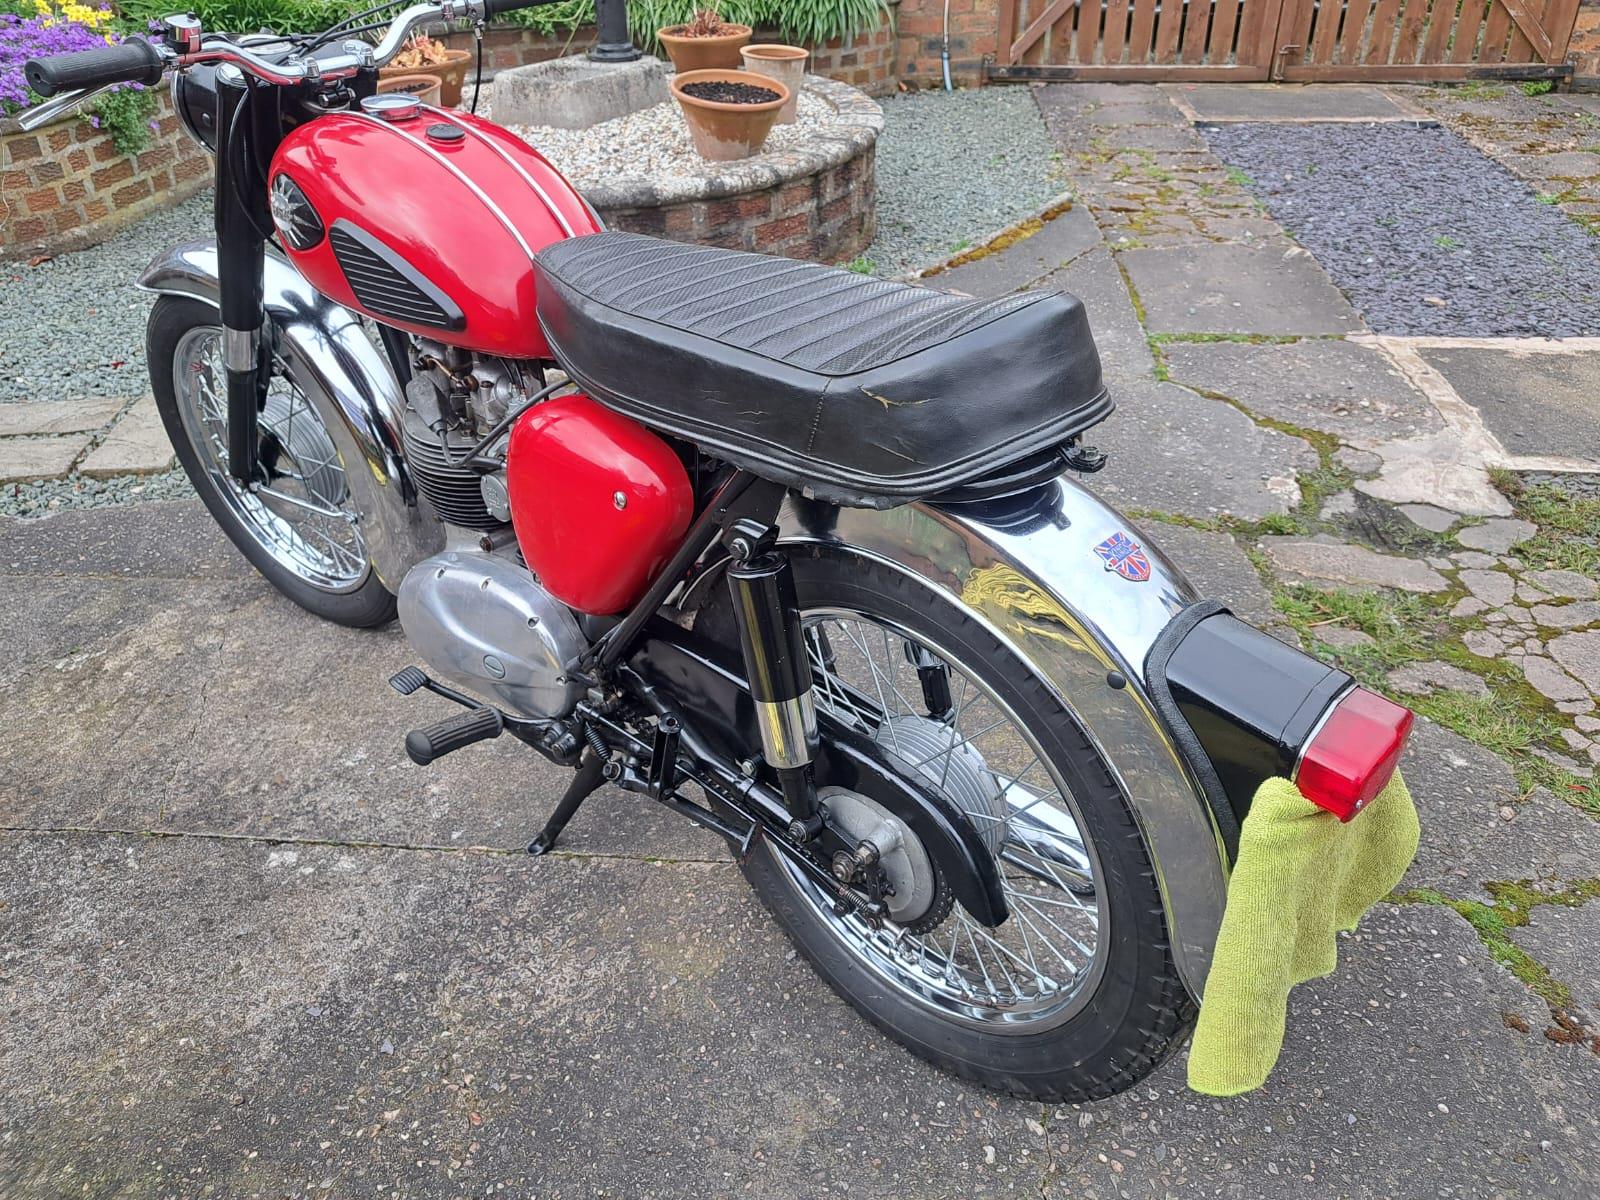 A 1963 BSA 350 MOTORCYCLE - ON A V5C, VENDOR STATES GOOD STARTER AND RUNNER, FROM A PRIVATE - Image 4 of 5